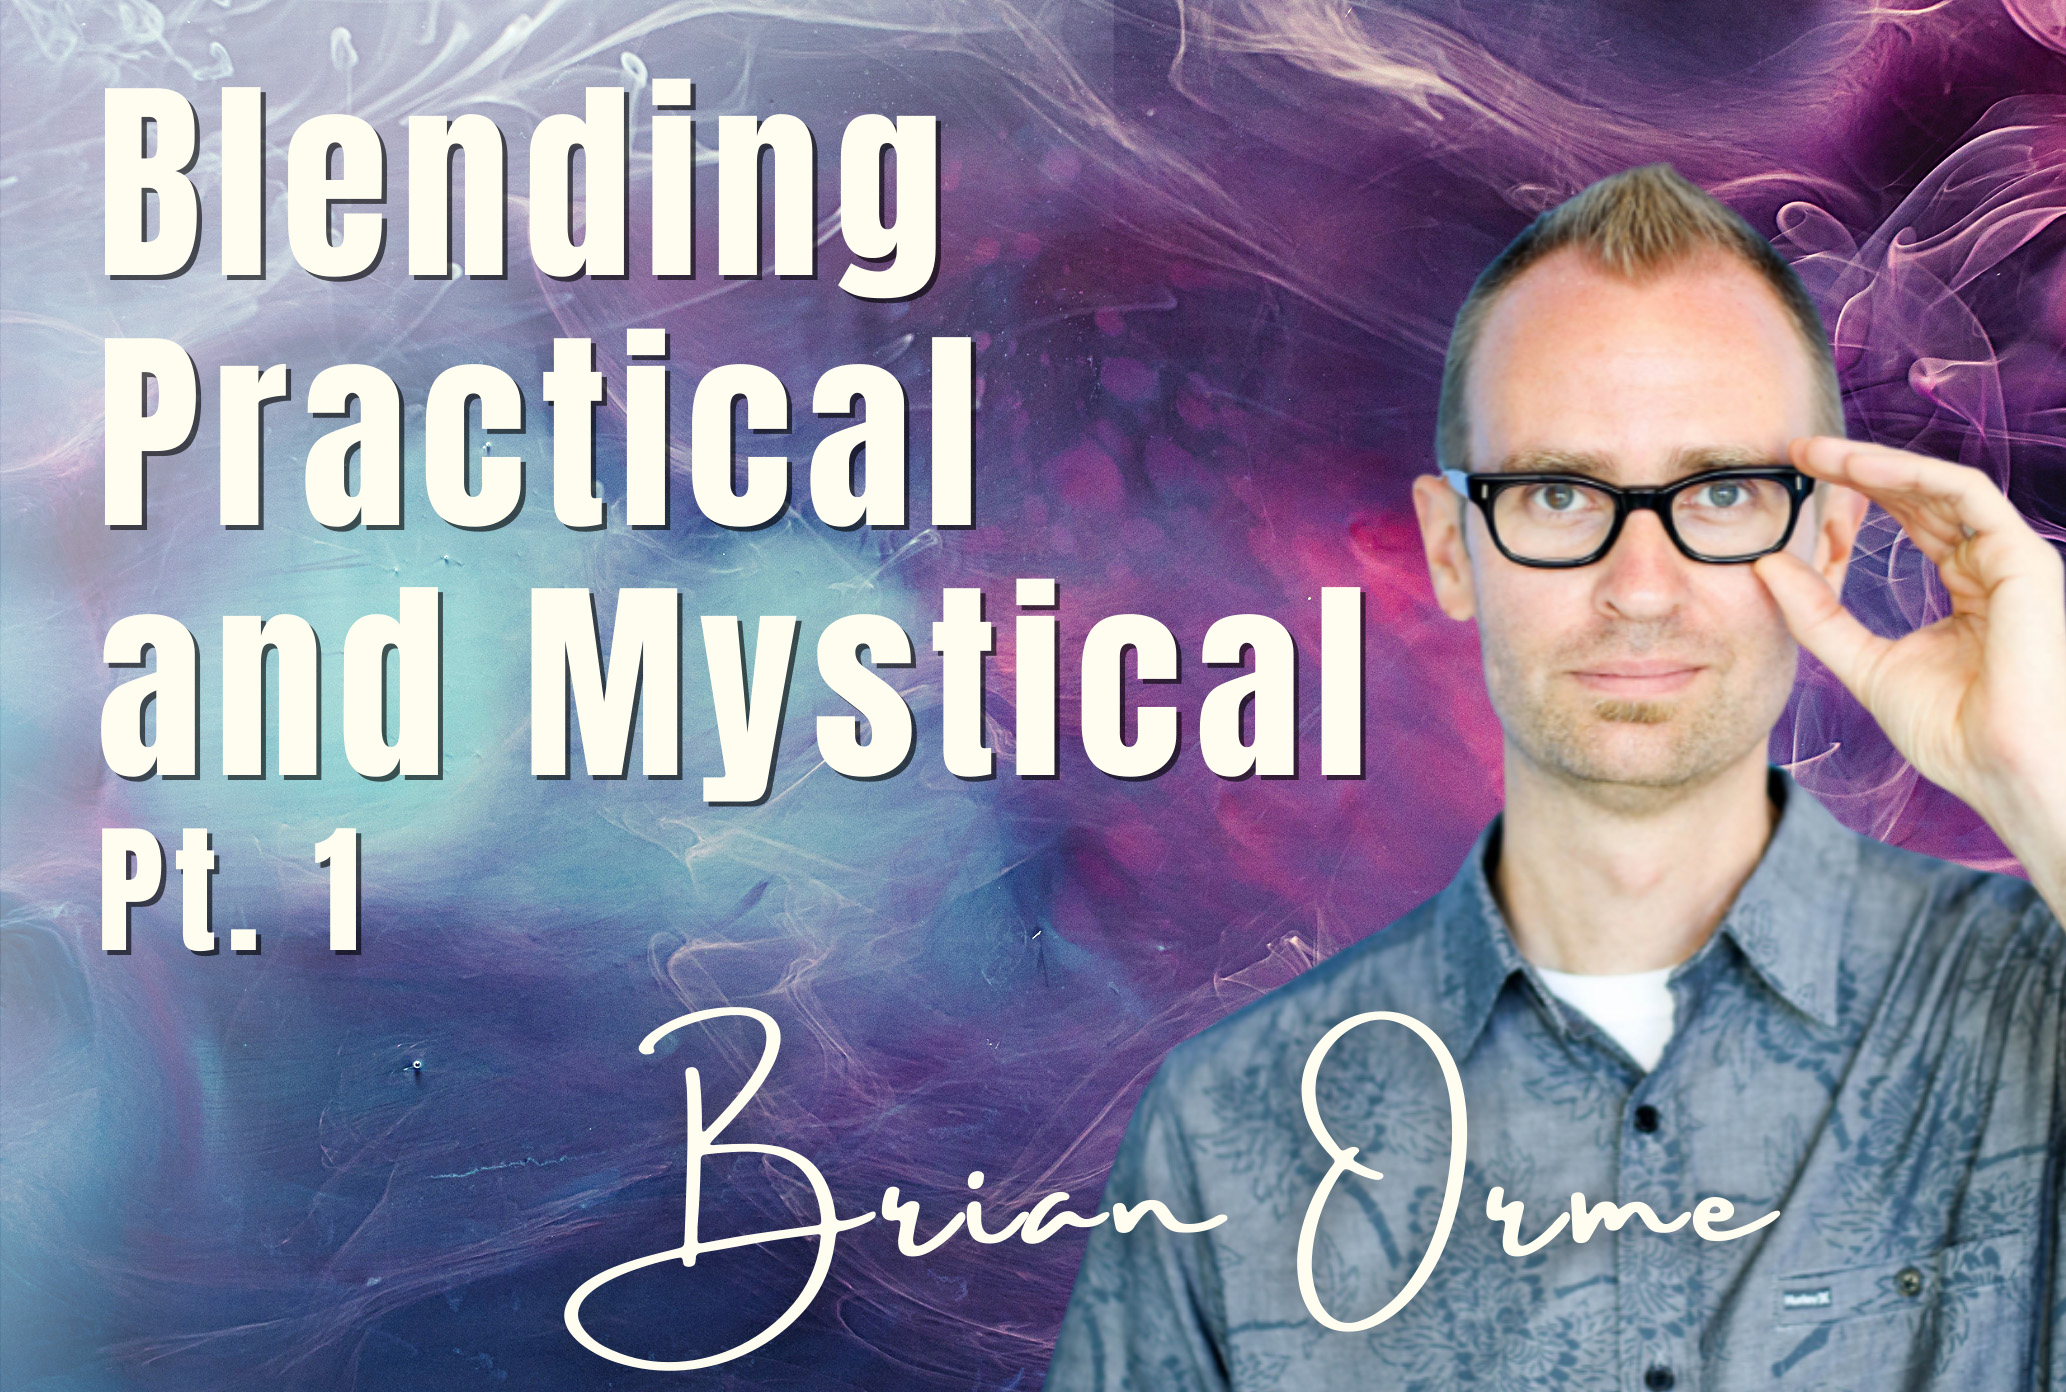 105 Pt. 1 Blending Practical and Mystical – Bria Orme